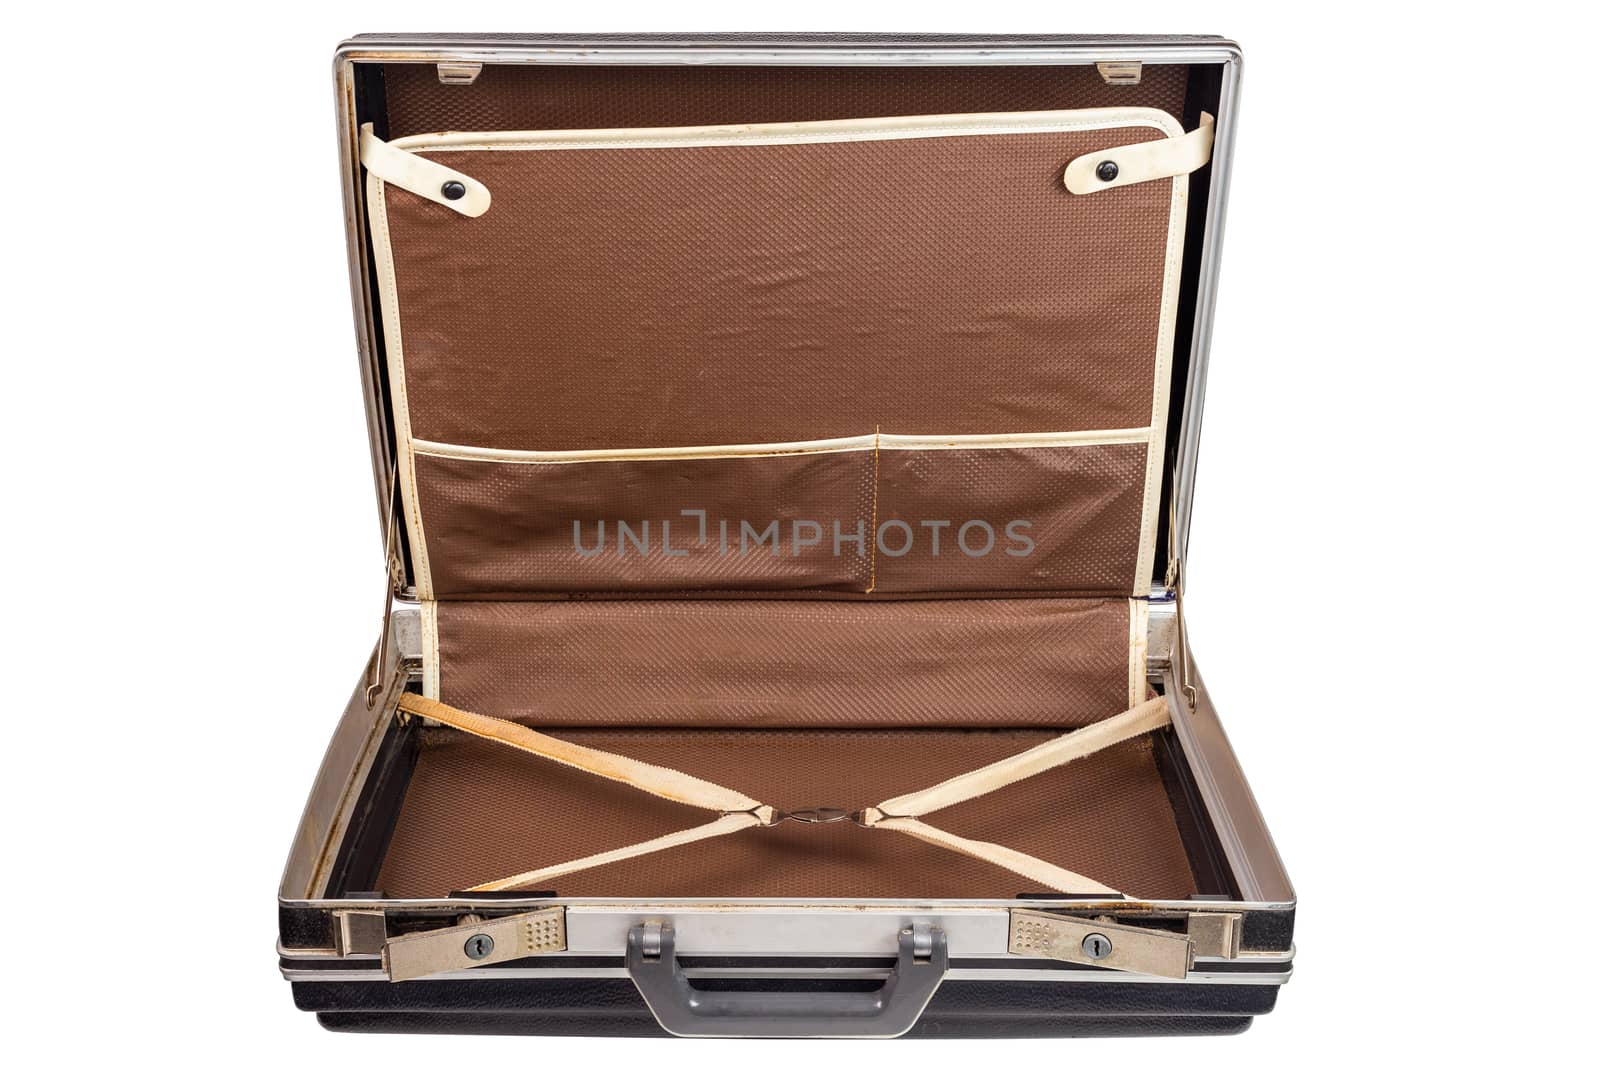 used and dirty old fashion black plastic suitcase or briefcase isolated on white background, open and lying by z1b